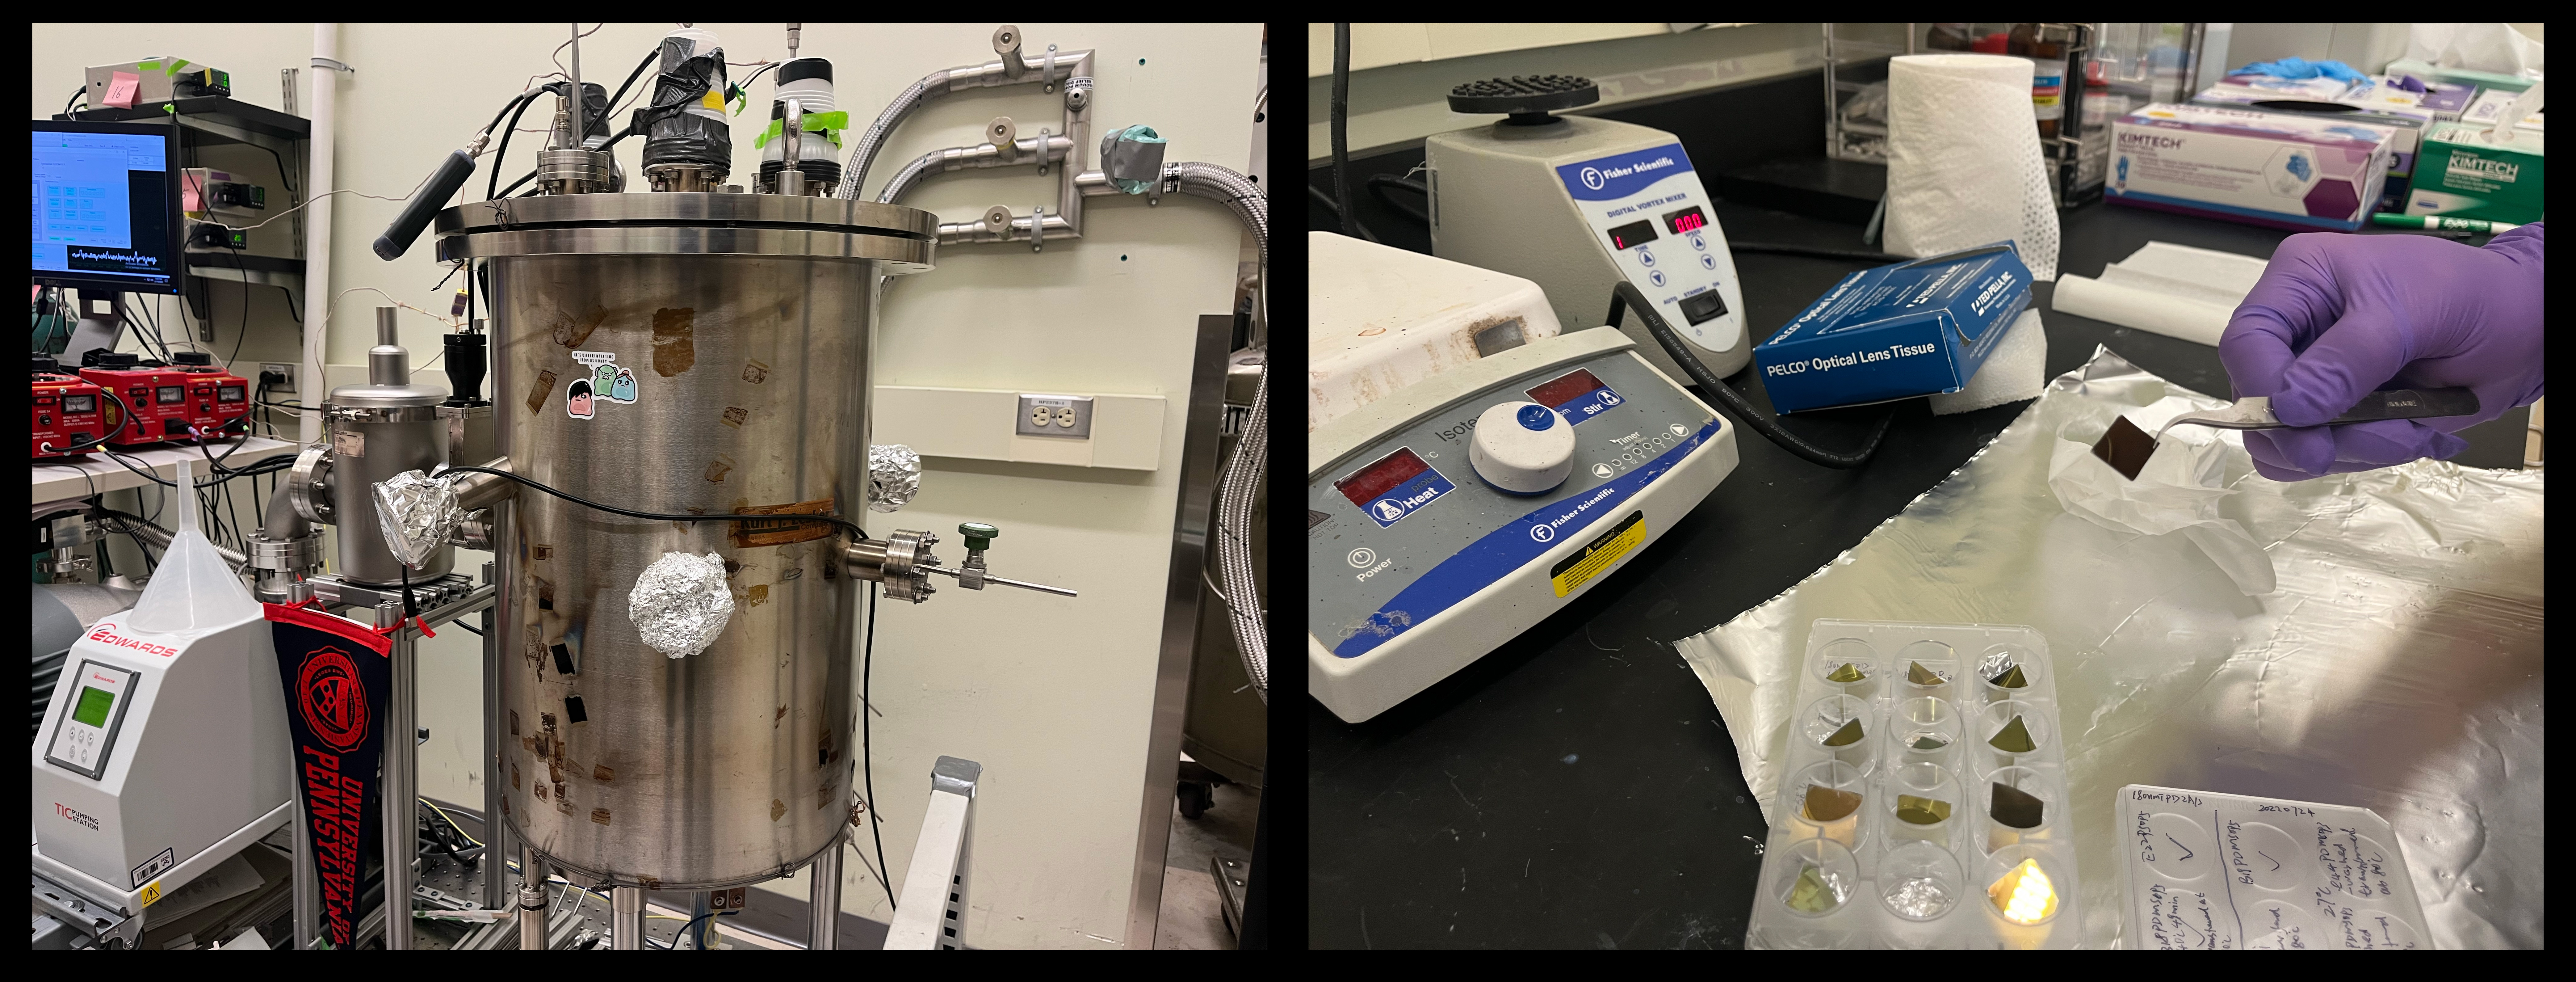 Side by side shots of lab equipment